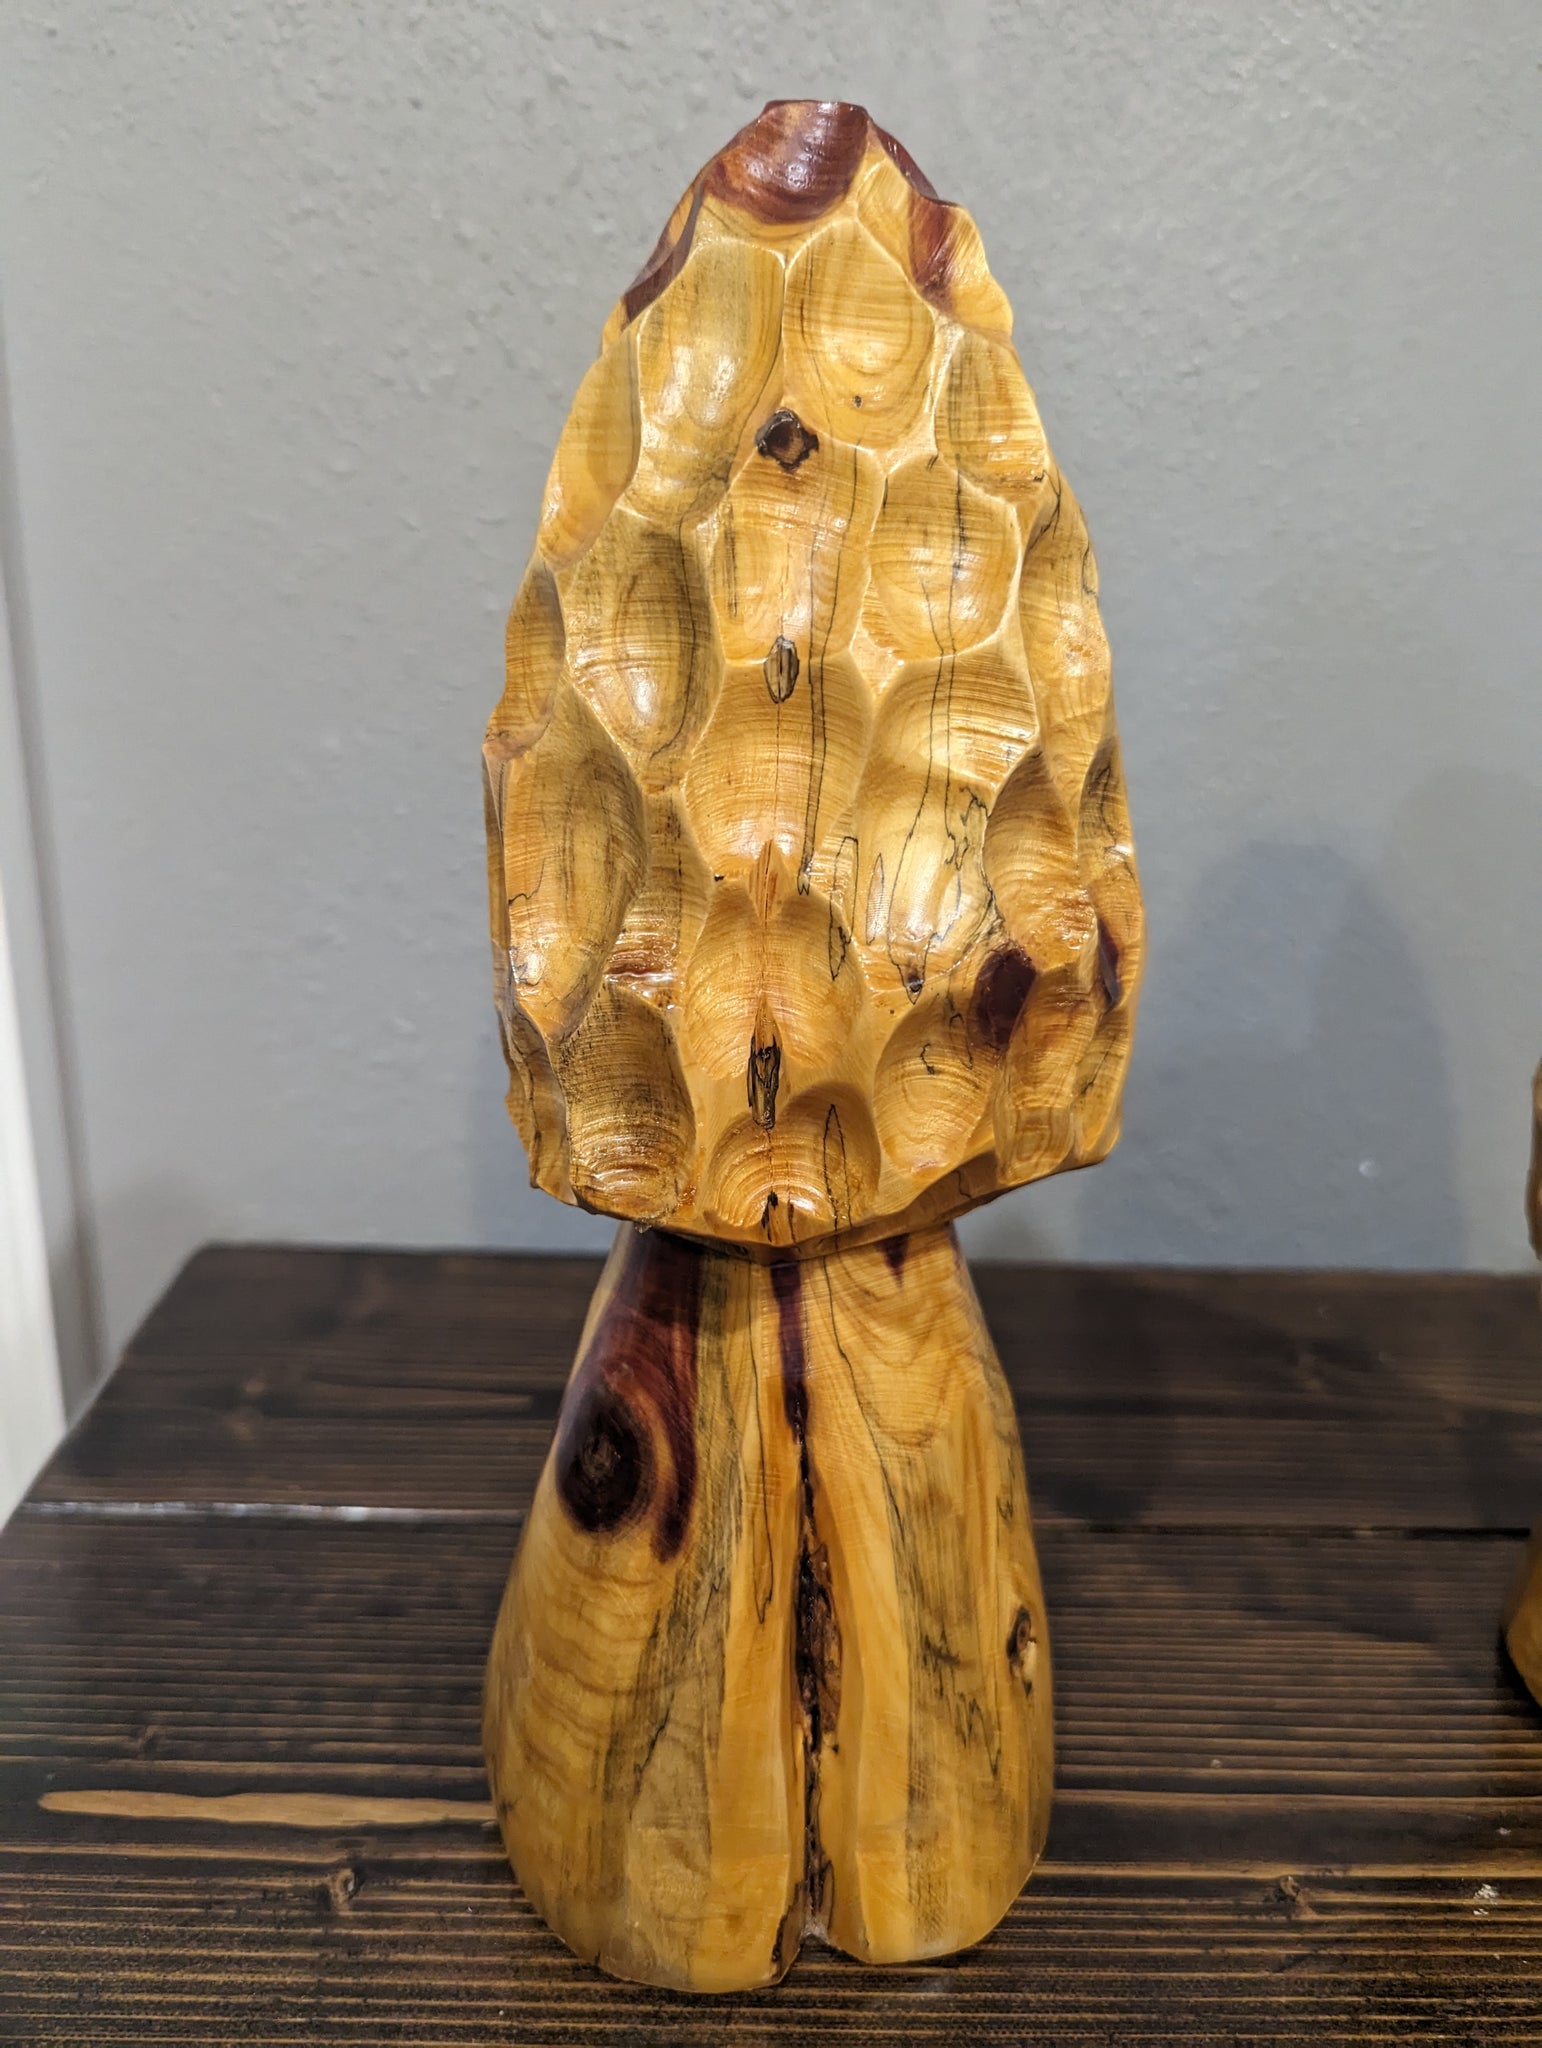 Is Cedar a good wood for carving?